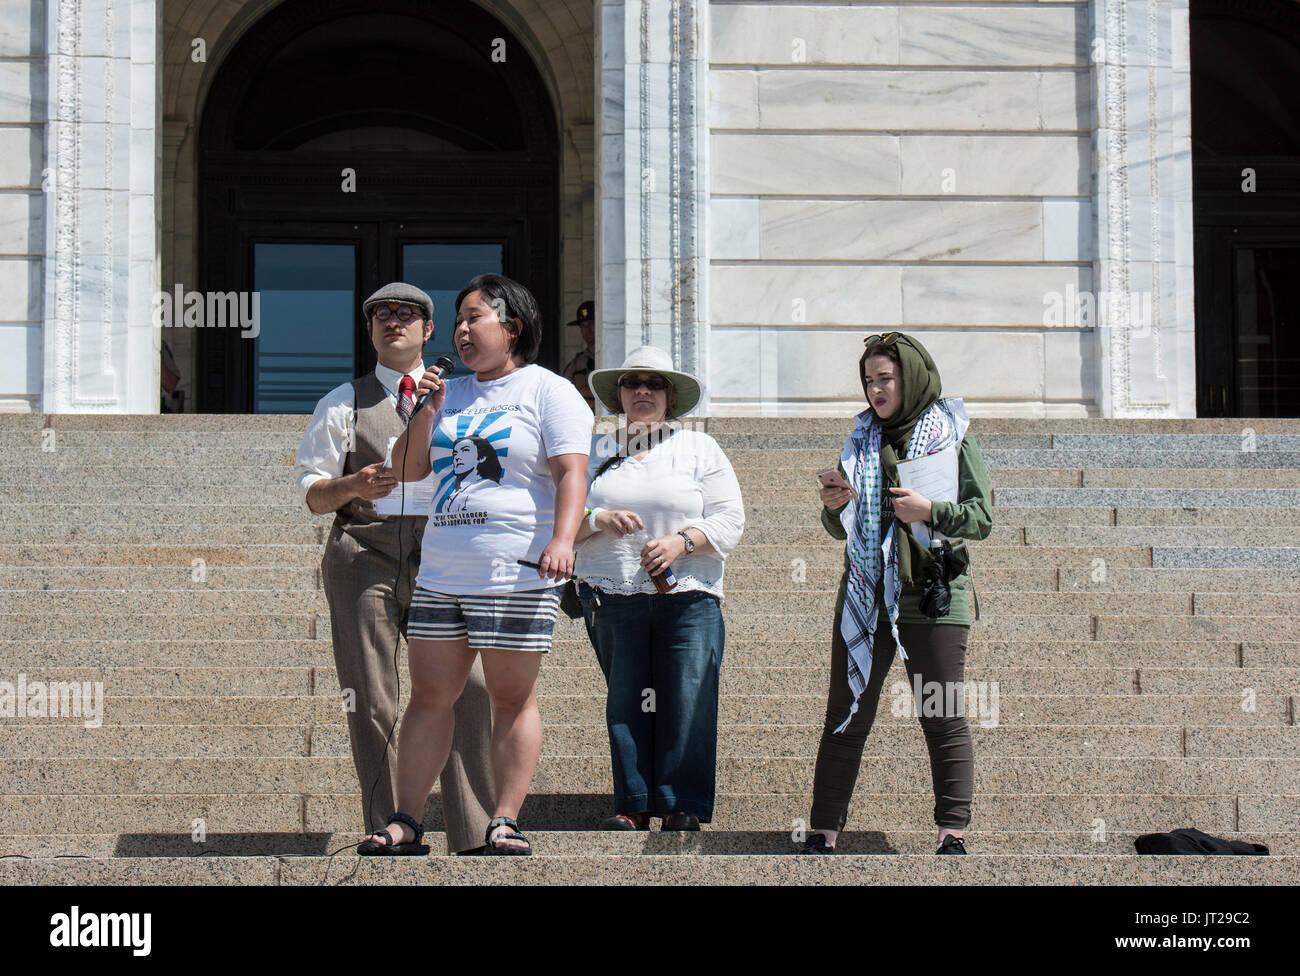 St. Paul, Minnesota.Pro Sharia protesters counterprotesting a rally that is going on inside the capitol which critizes Sharia law. A Jew, Muslim, Asi Stock Photo